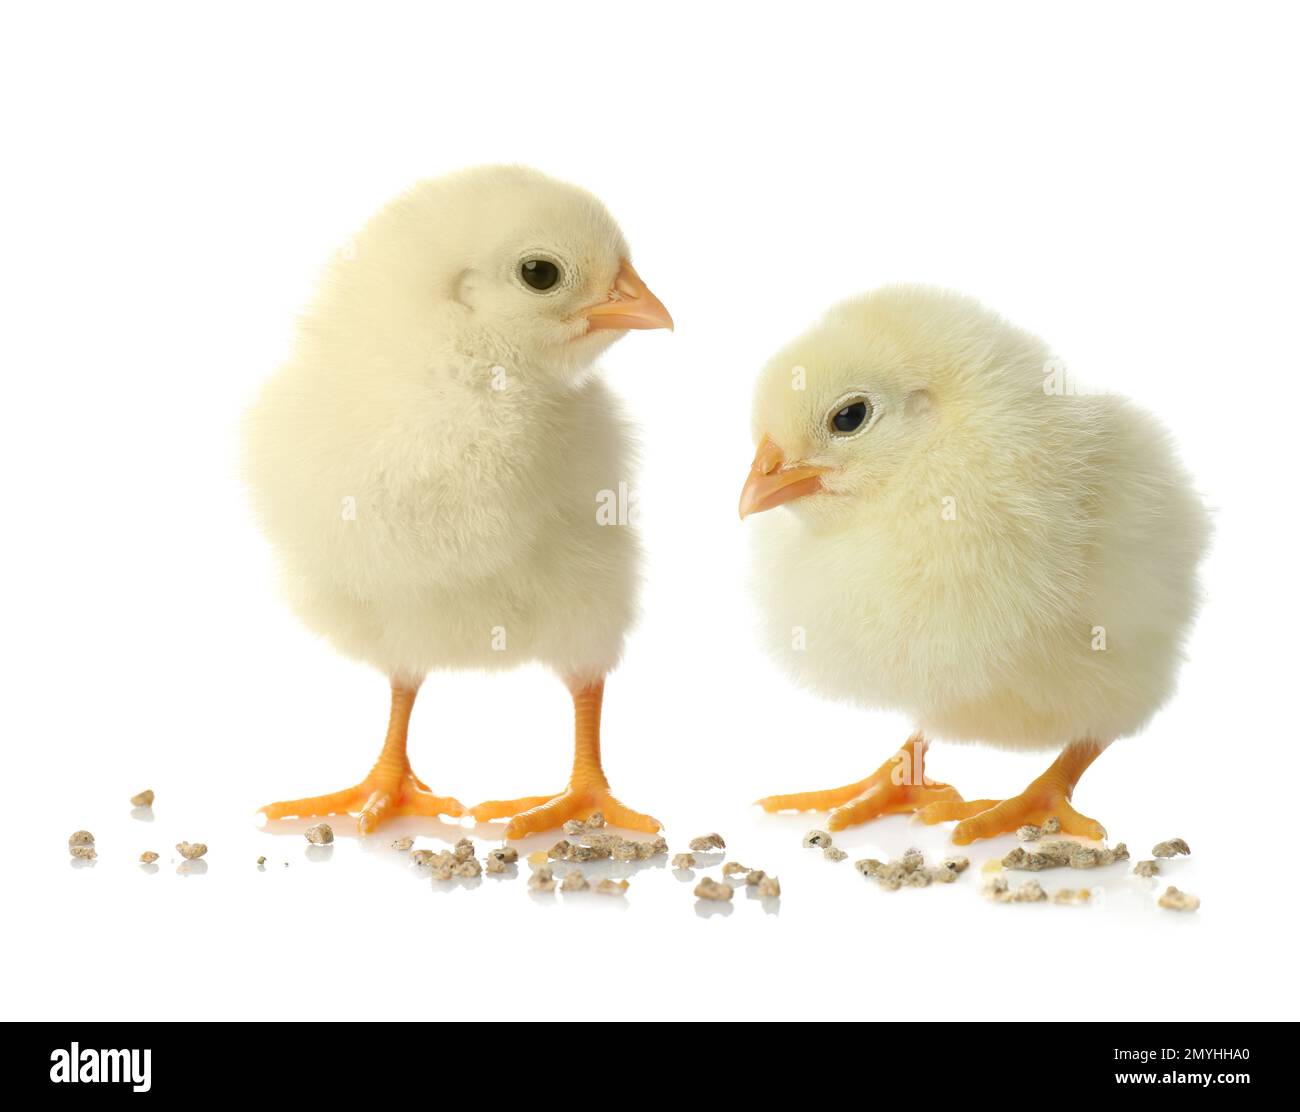 Two cute fluffy chickens on white background Stock Photo